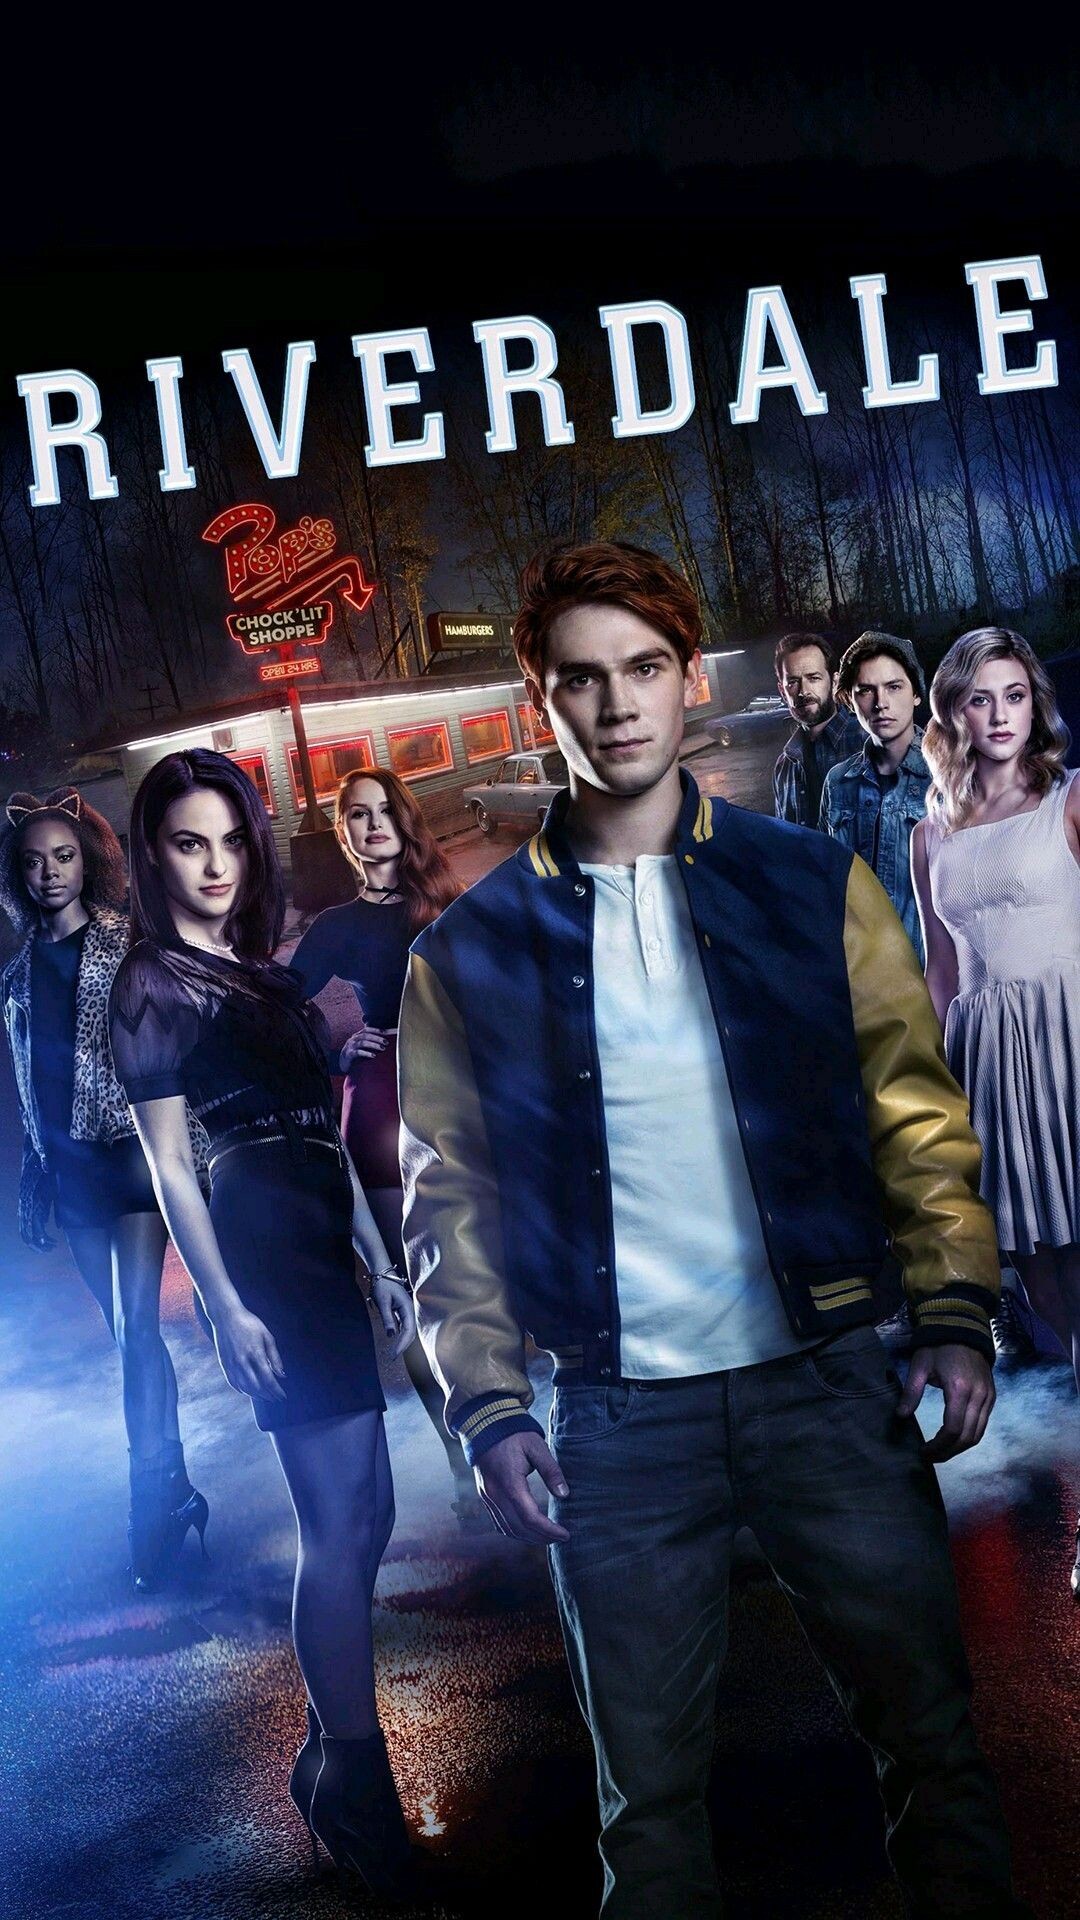 Riverdale (TV Series): The show was adapted by Archie Comics chief creative officer Roberto Aguirre-Sacasa. 1080x1920 Full HD Background.